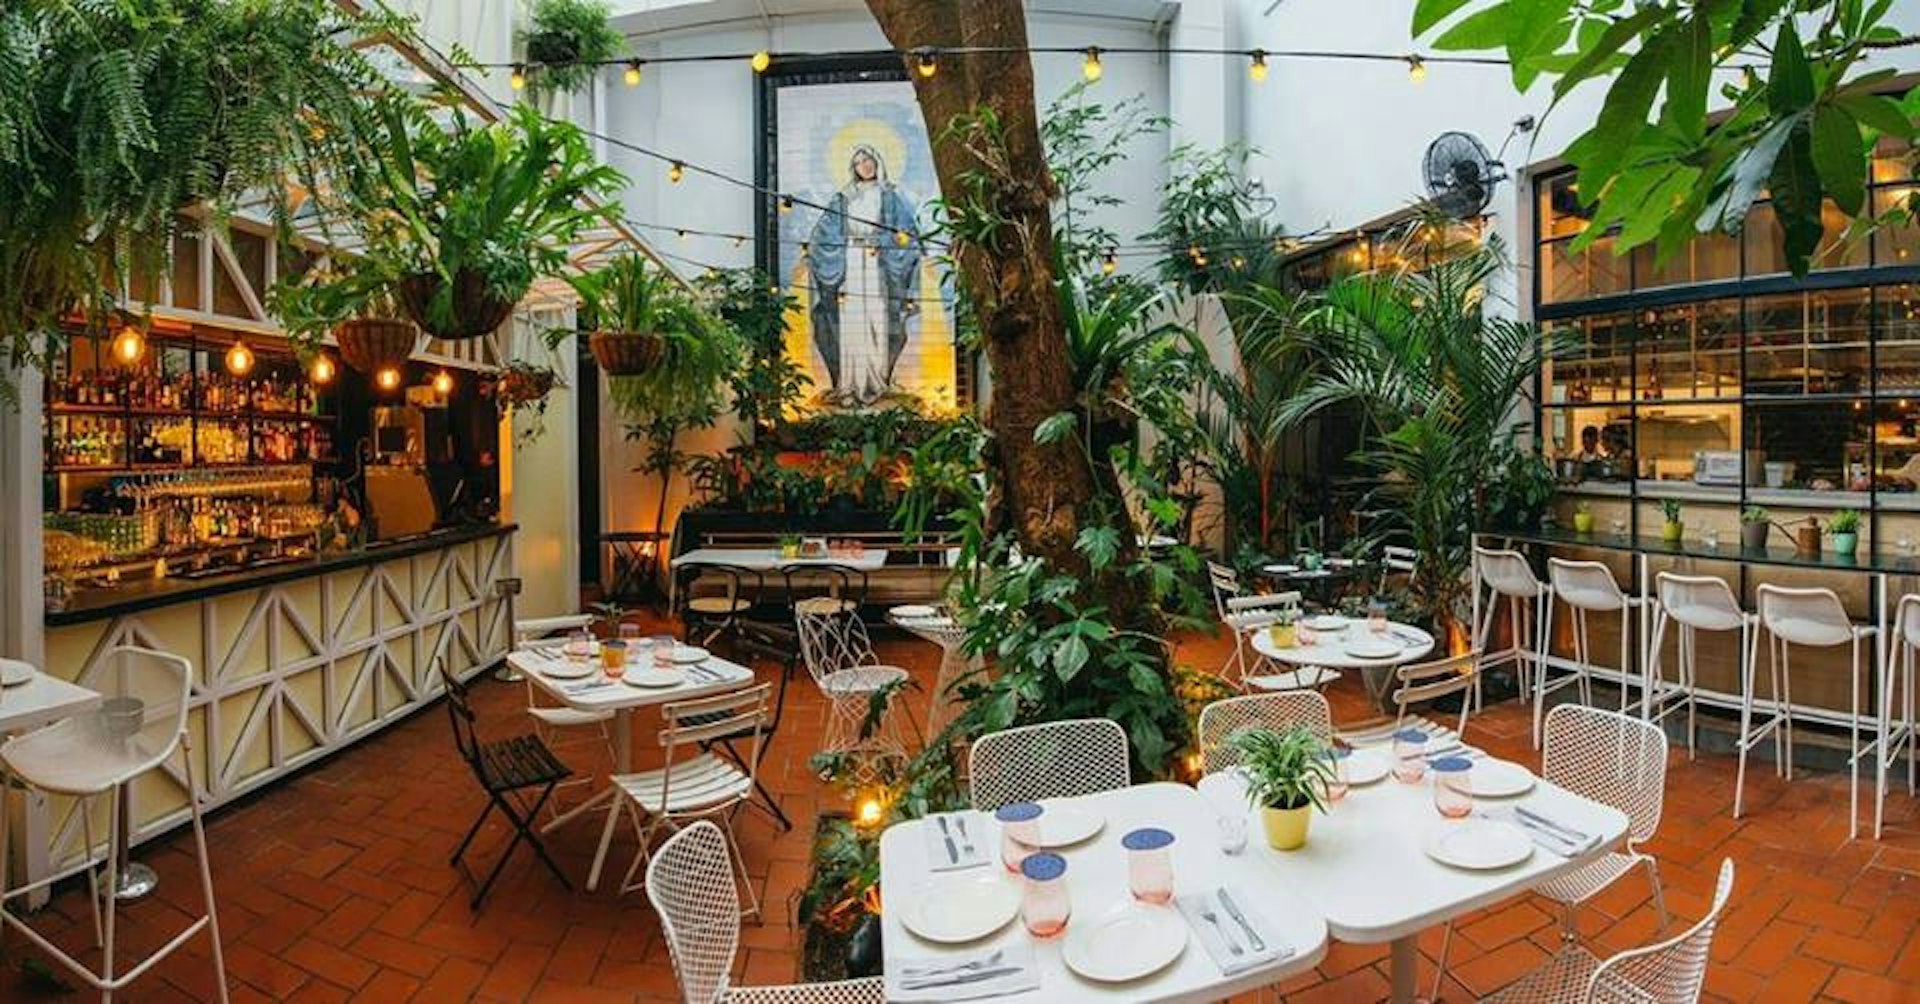 The lush plants, overhead lighting and large mural of the Virgin Mary make for a cozy and intimate atmosphere at Ochoymedio Restaurant in Panama City. Ochoymedio Restaurant 